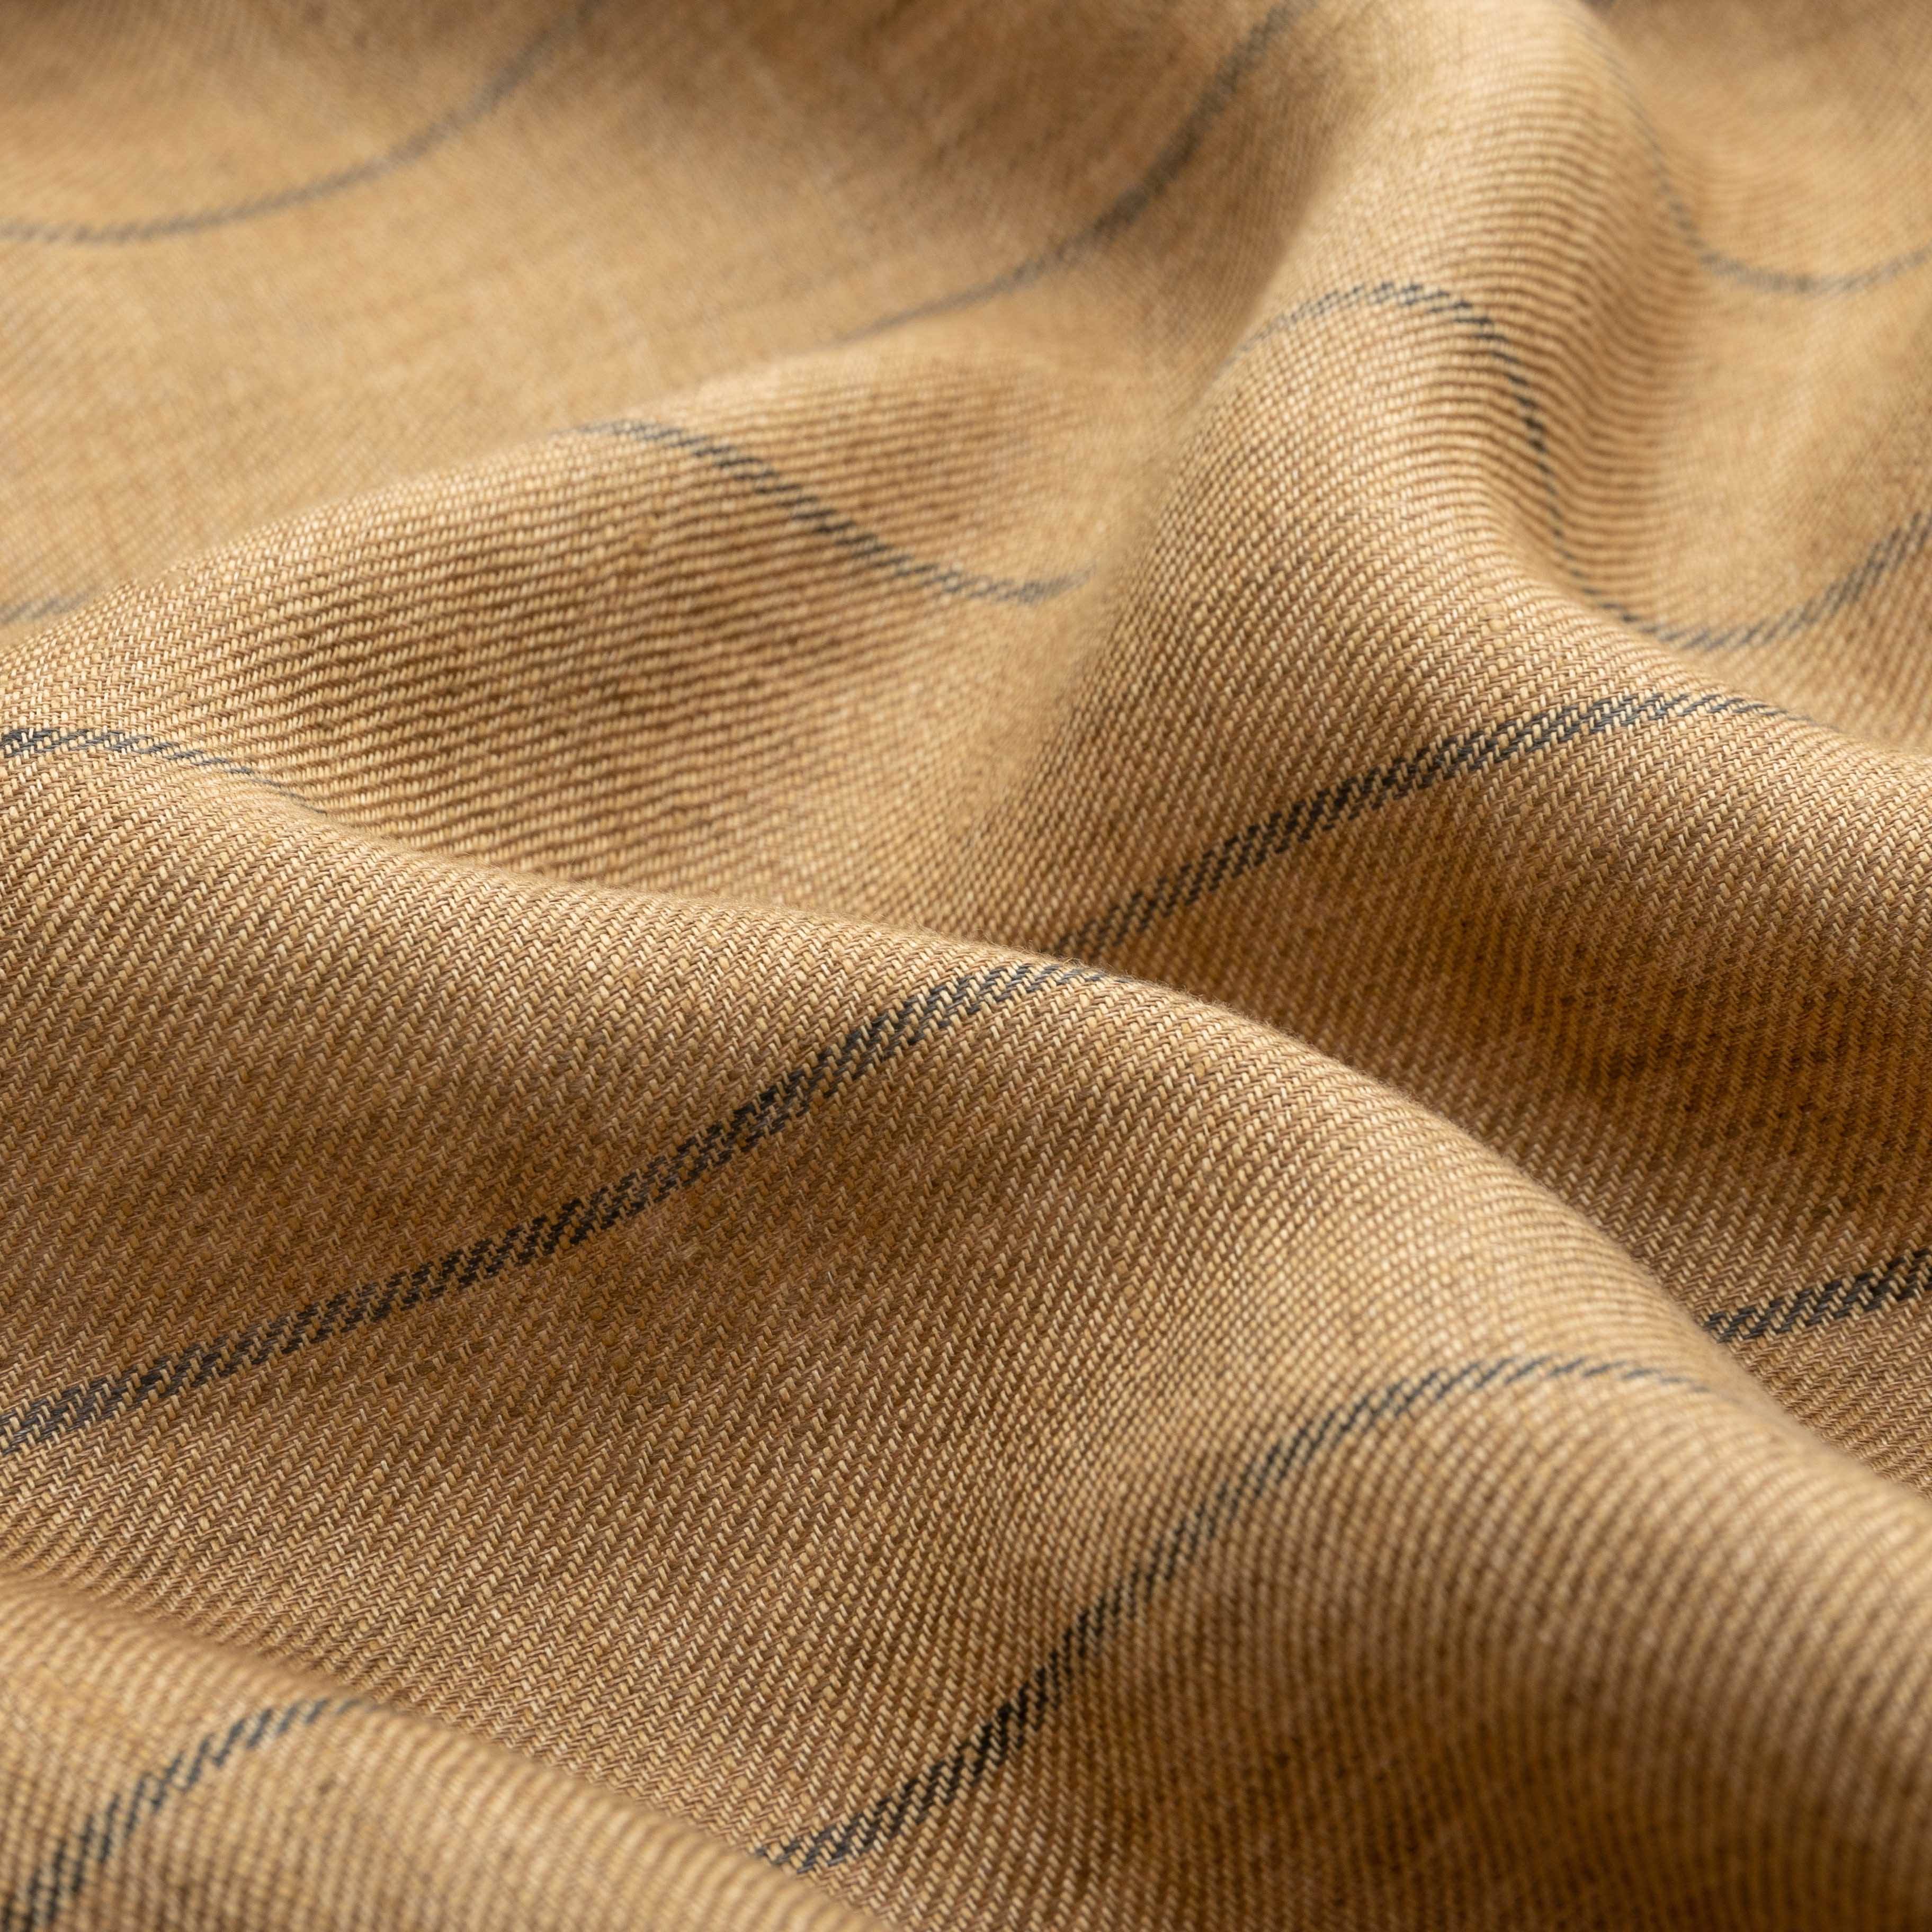 Hot sale ECO-friendly fabric 100% Linen Skin friendly fabric For Clothing